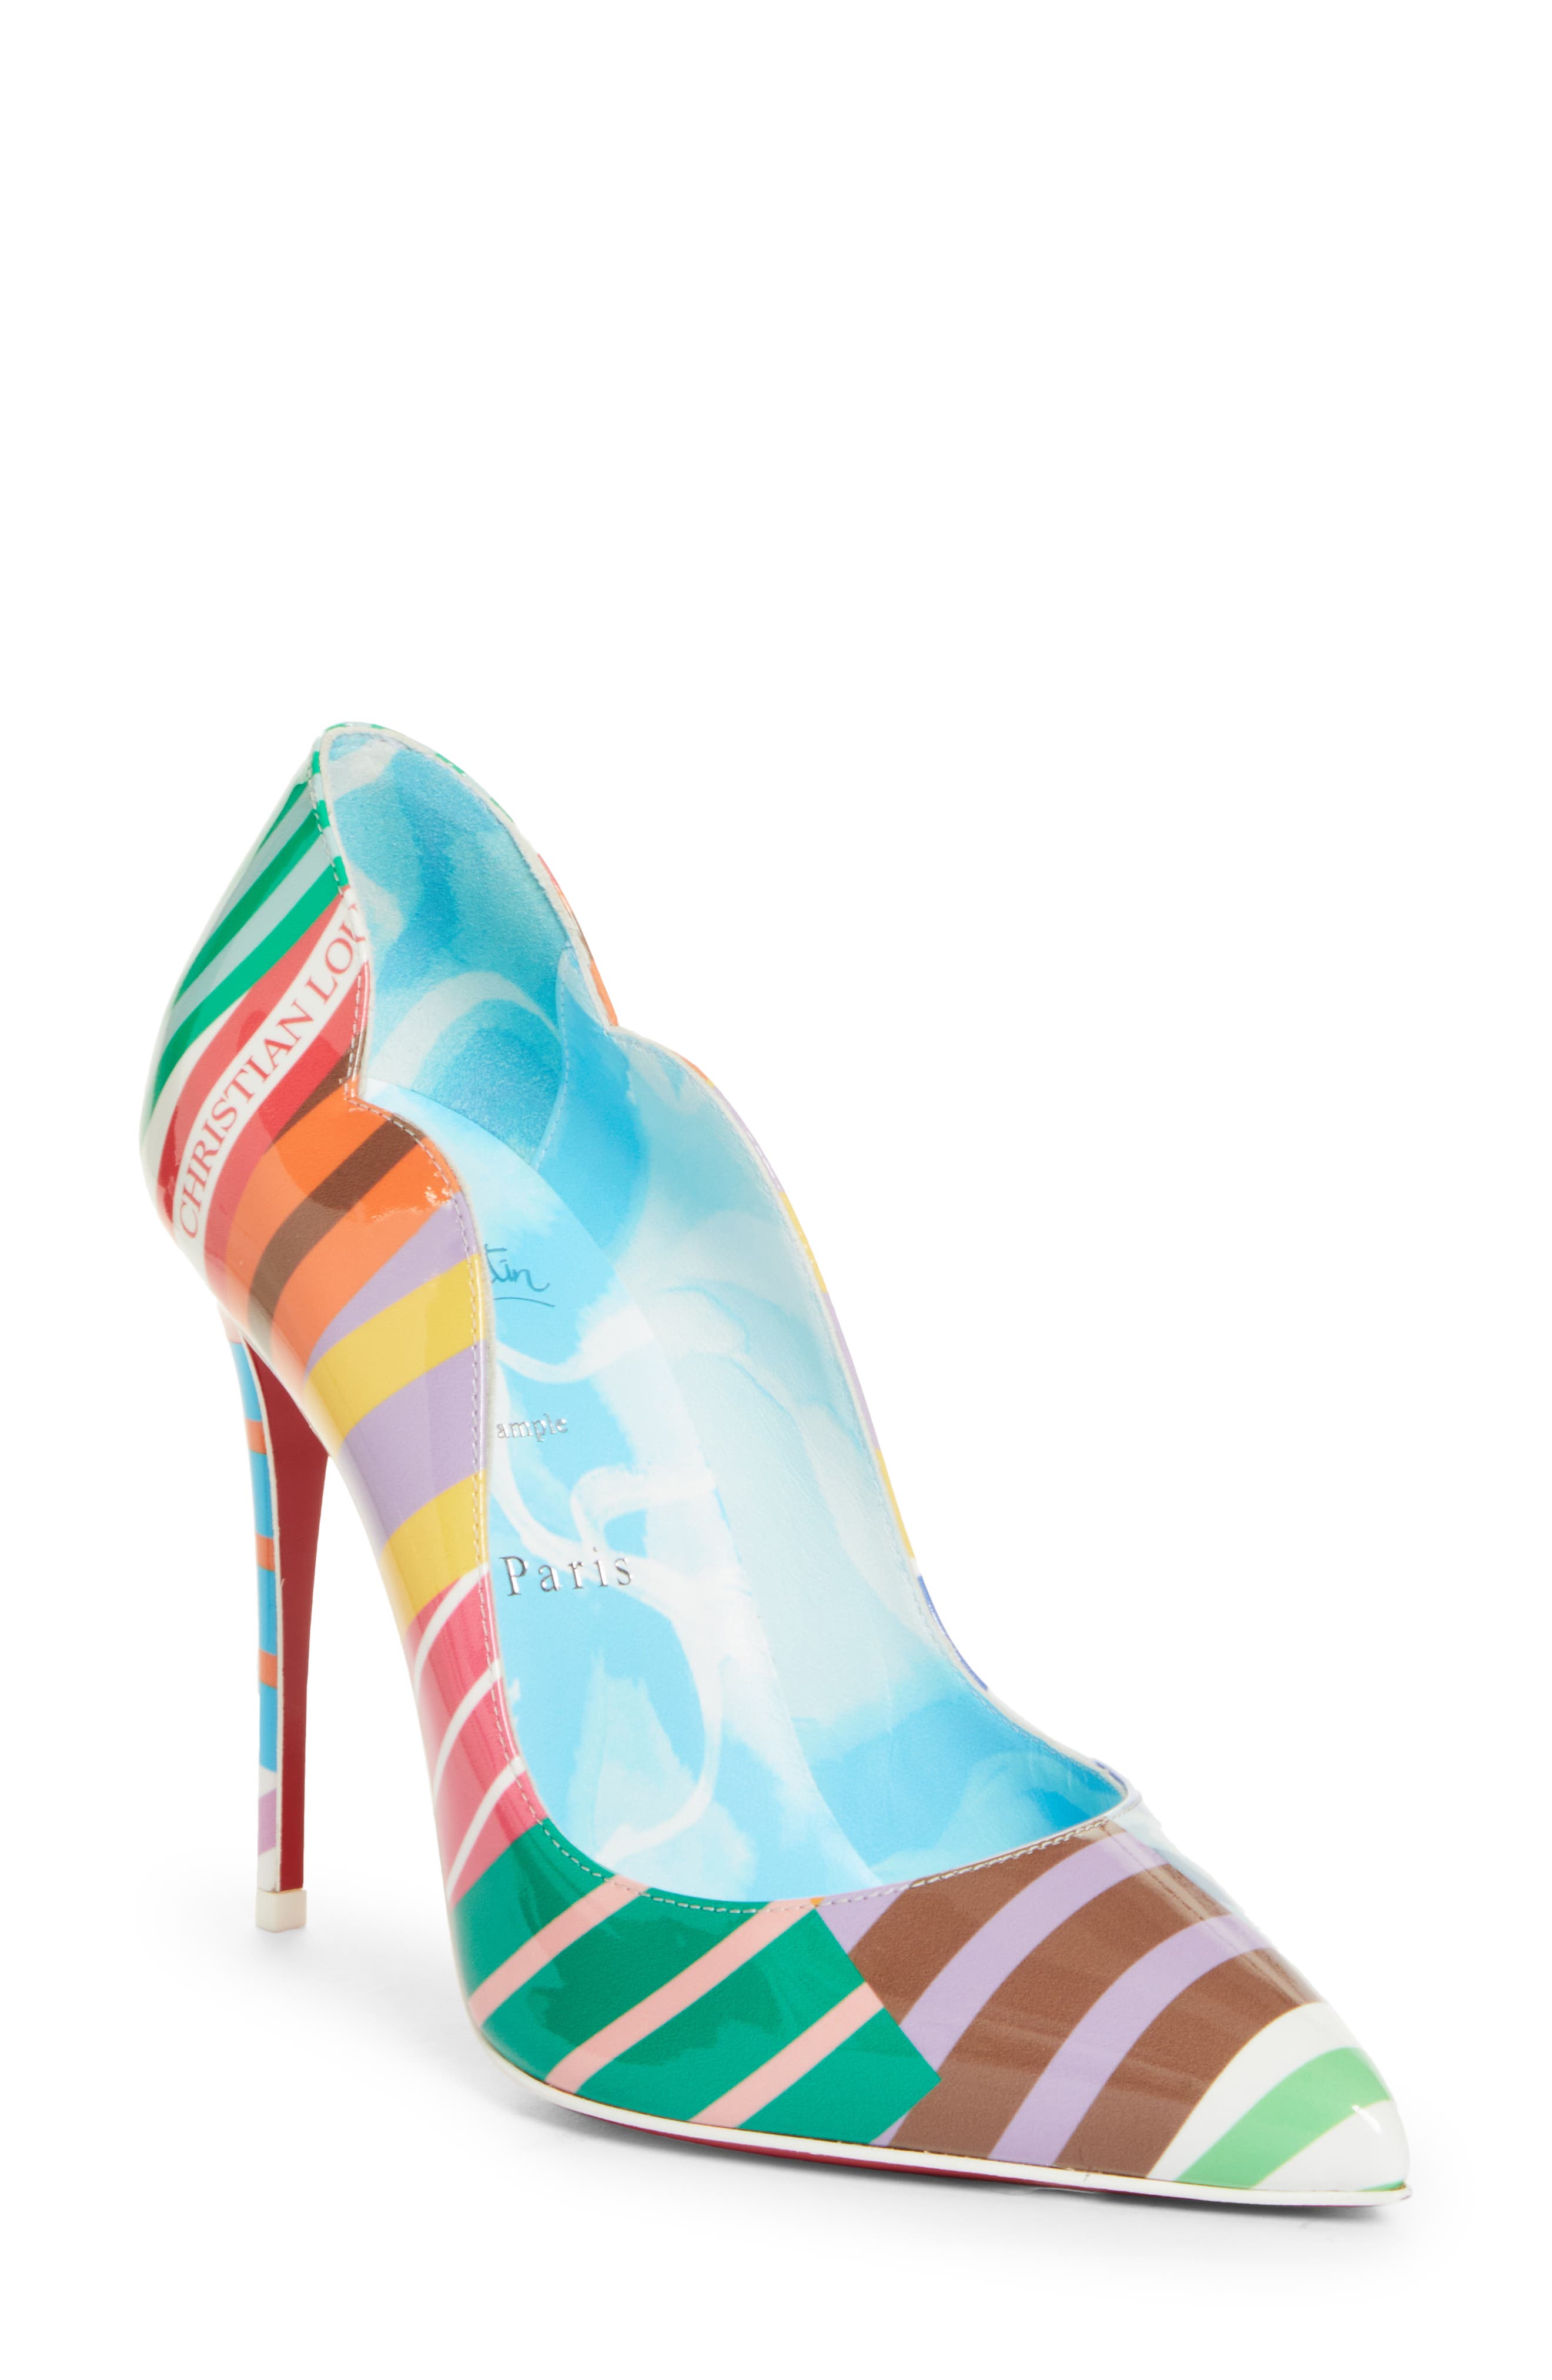 Christian Louboutin Hot Chick Pointed Toe Pump in Multi/Blue